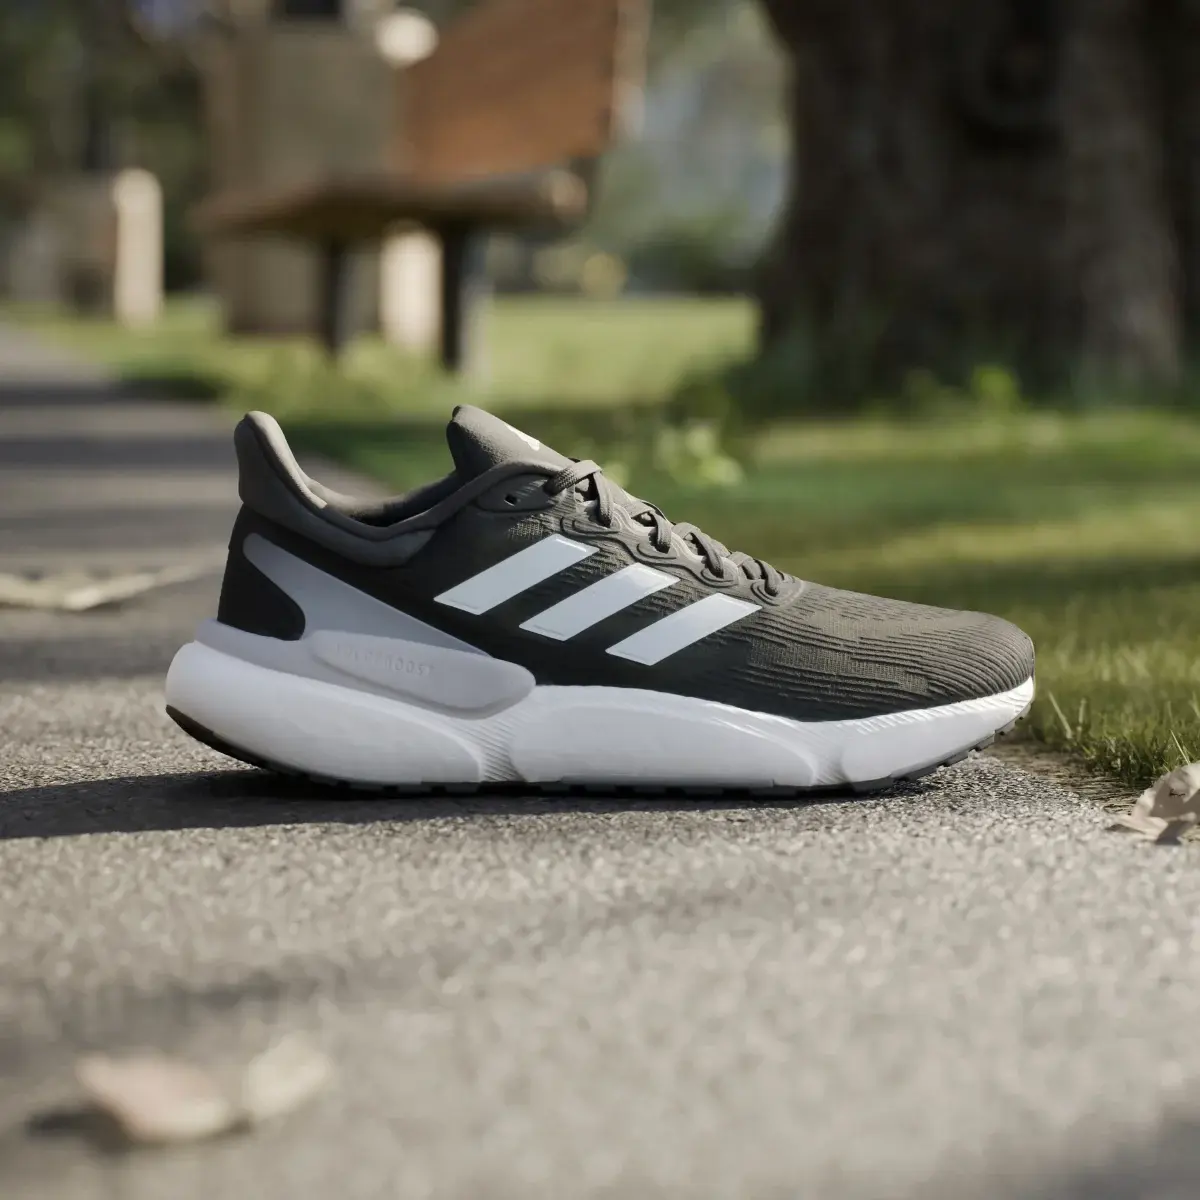 Adidas Solarboost 5 Running Shoes. 2